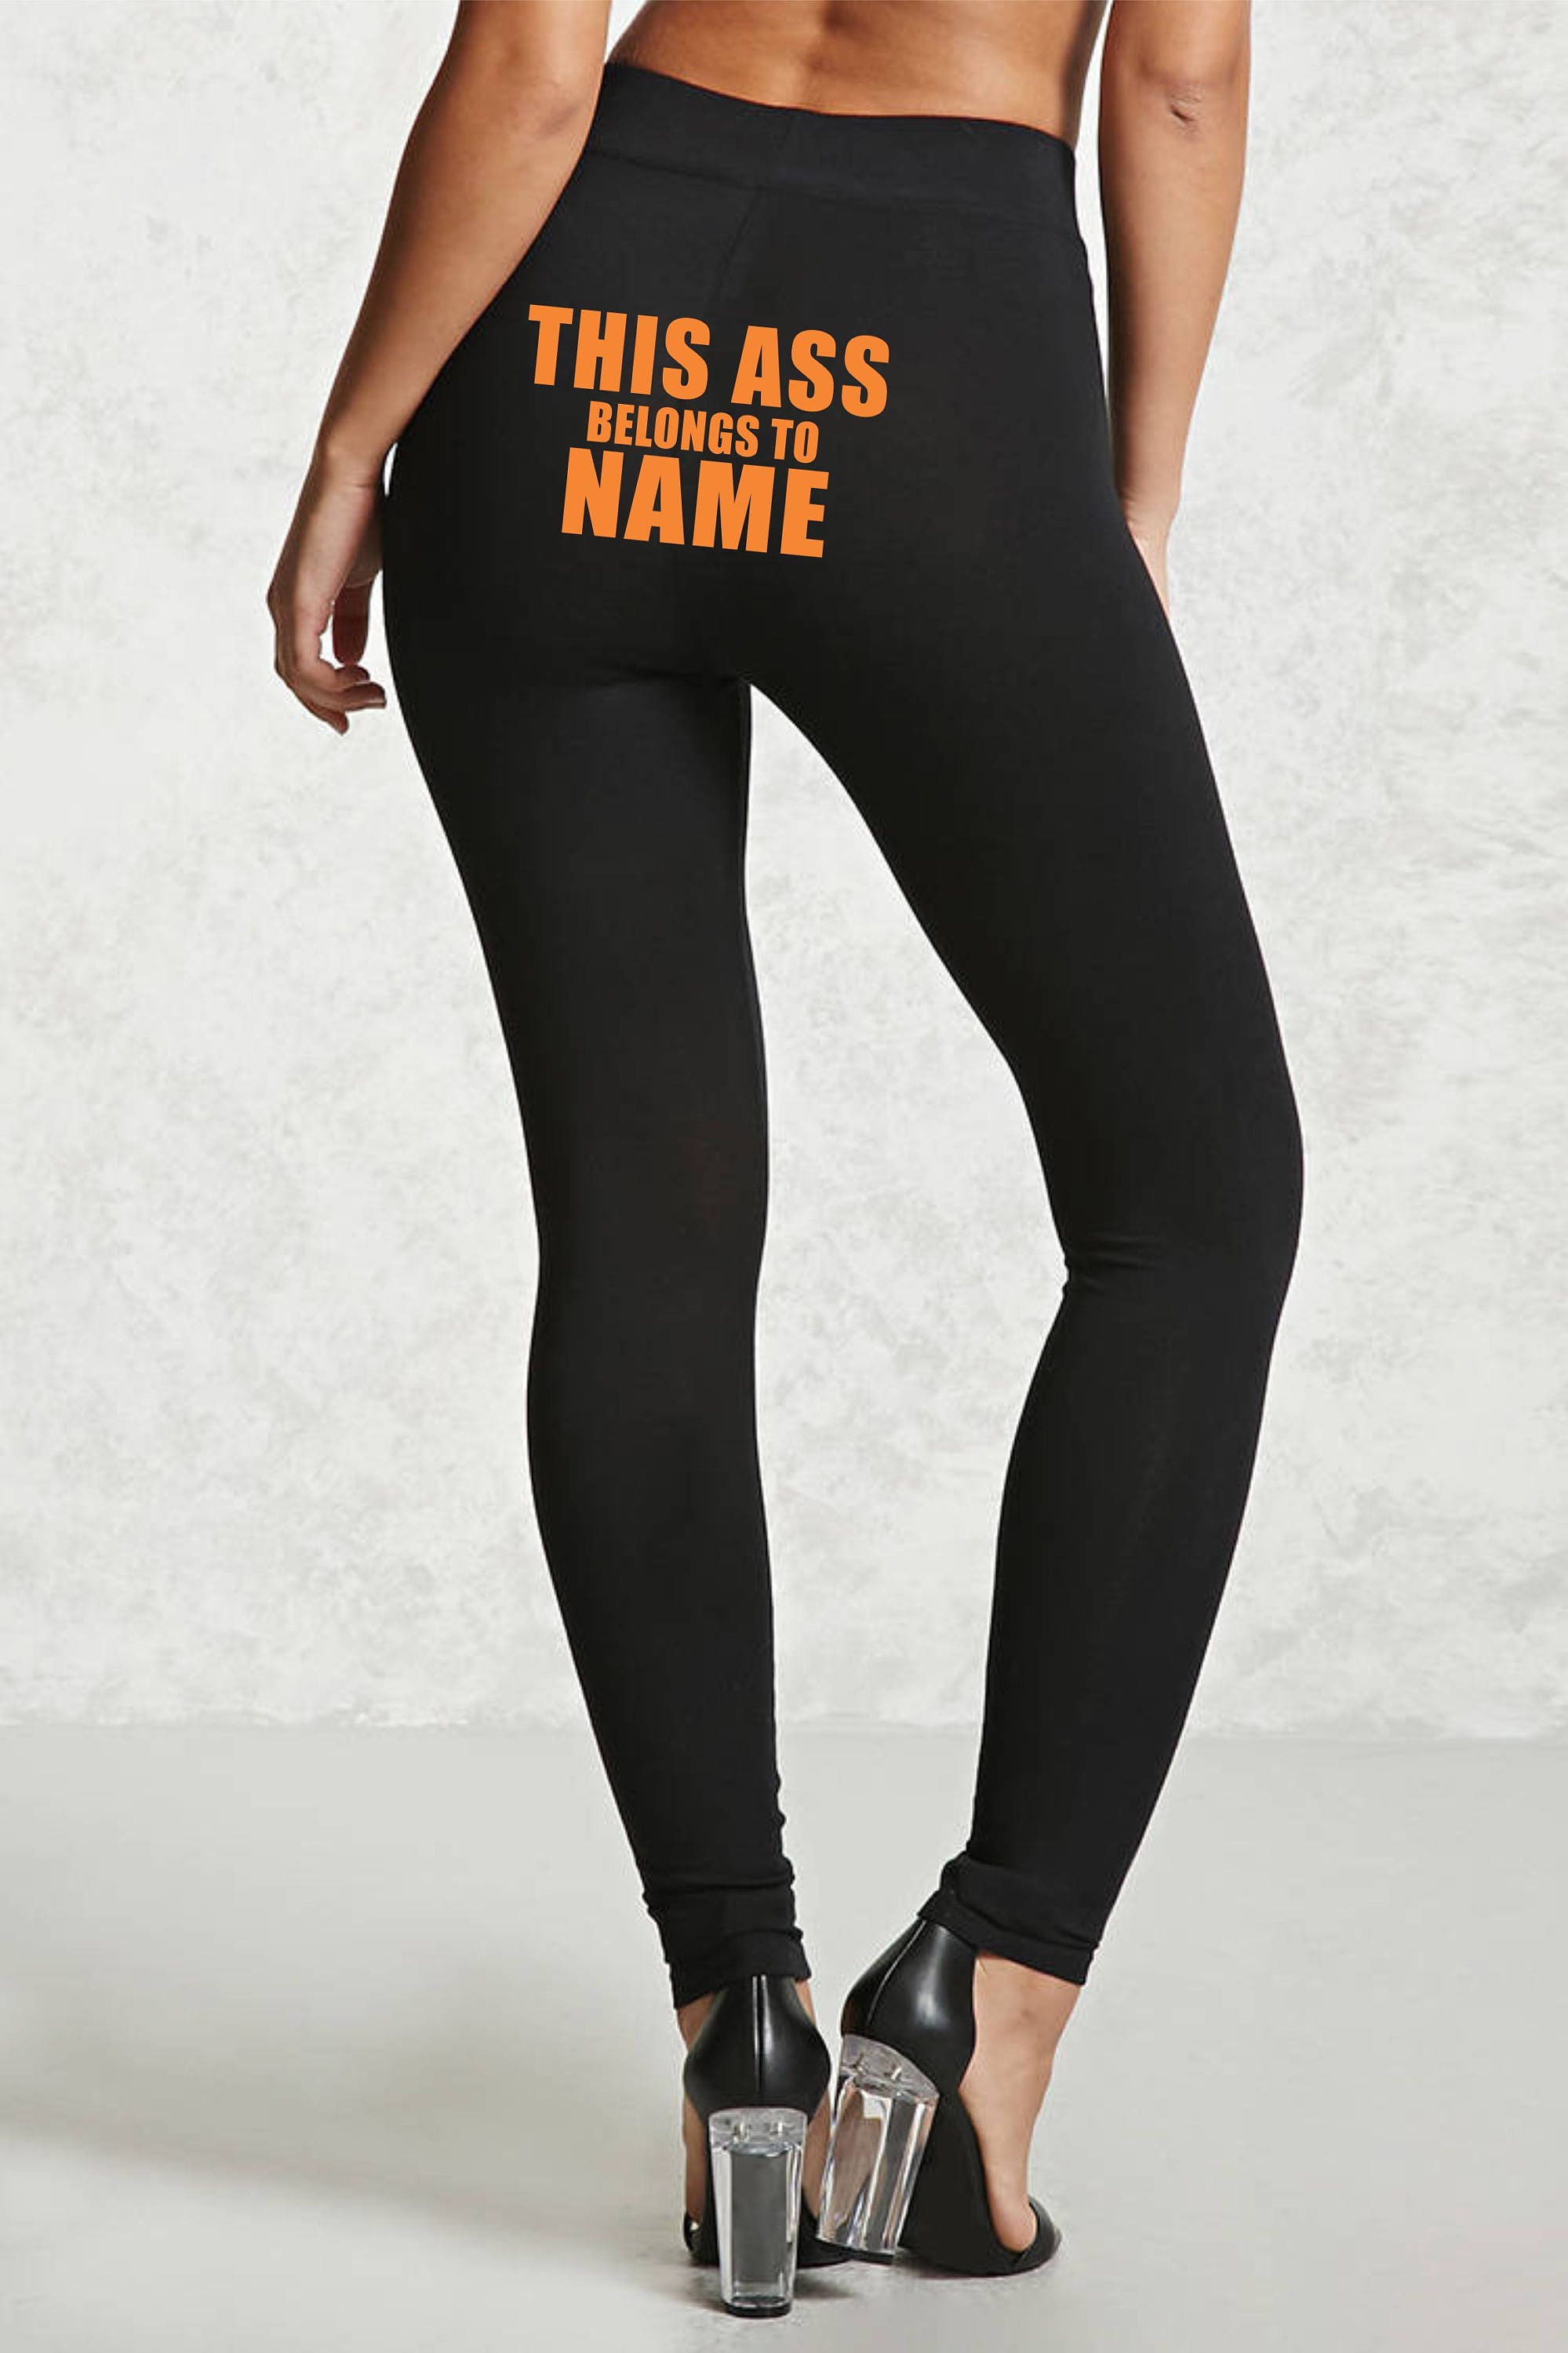 This ASS Belongs to NAME Leggings Black Pant Workout Yoga Funny Squat Butt  Booty Girlfriend Fiance Wife Christmas Wedding Shower Gift -  Canada